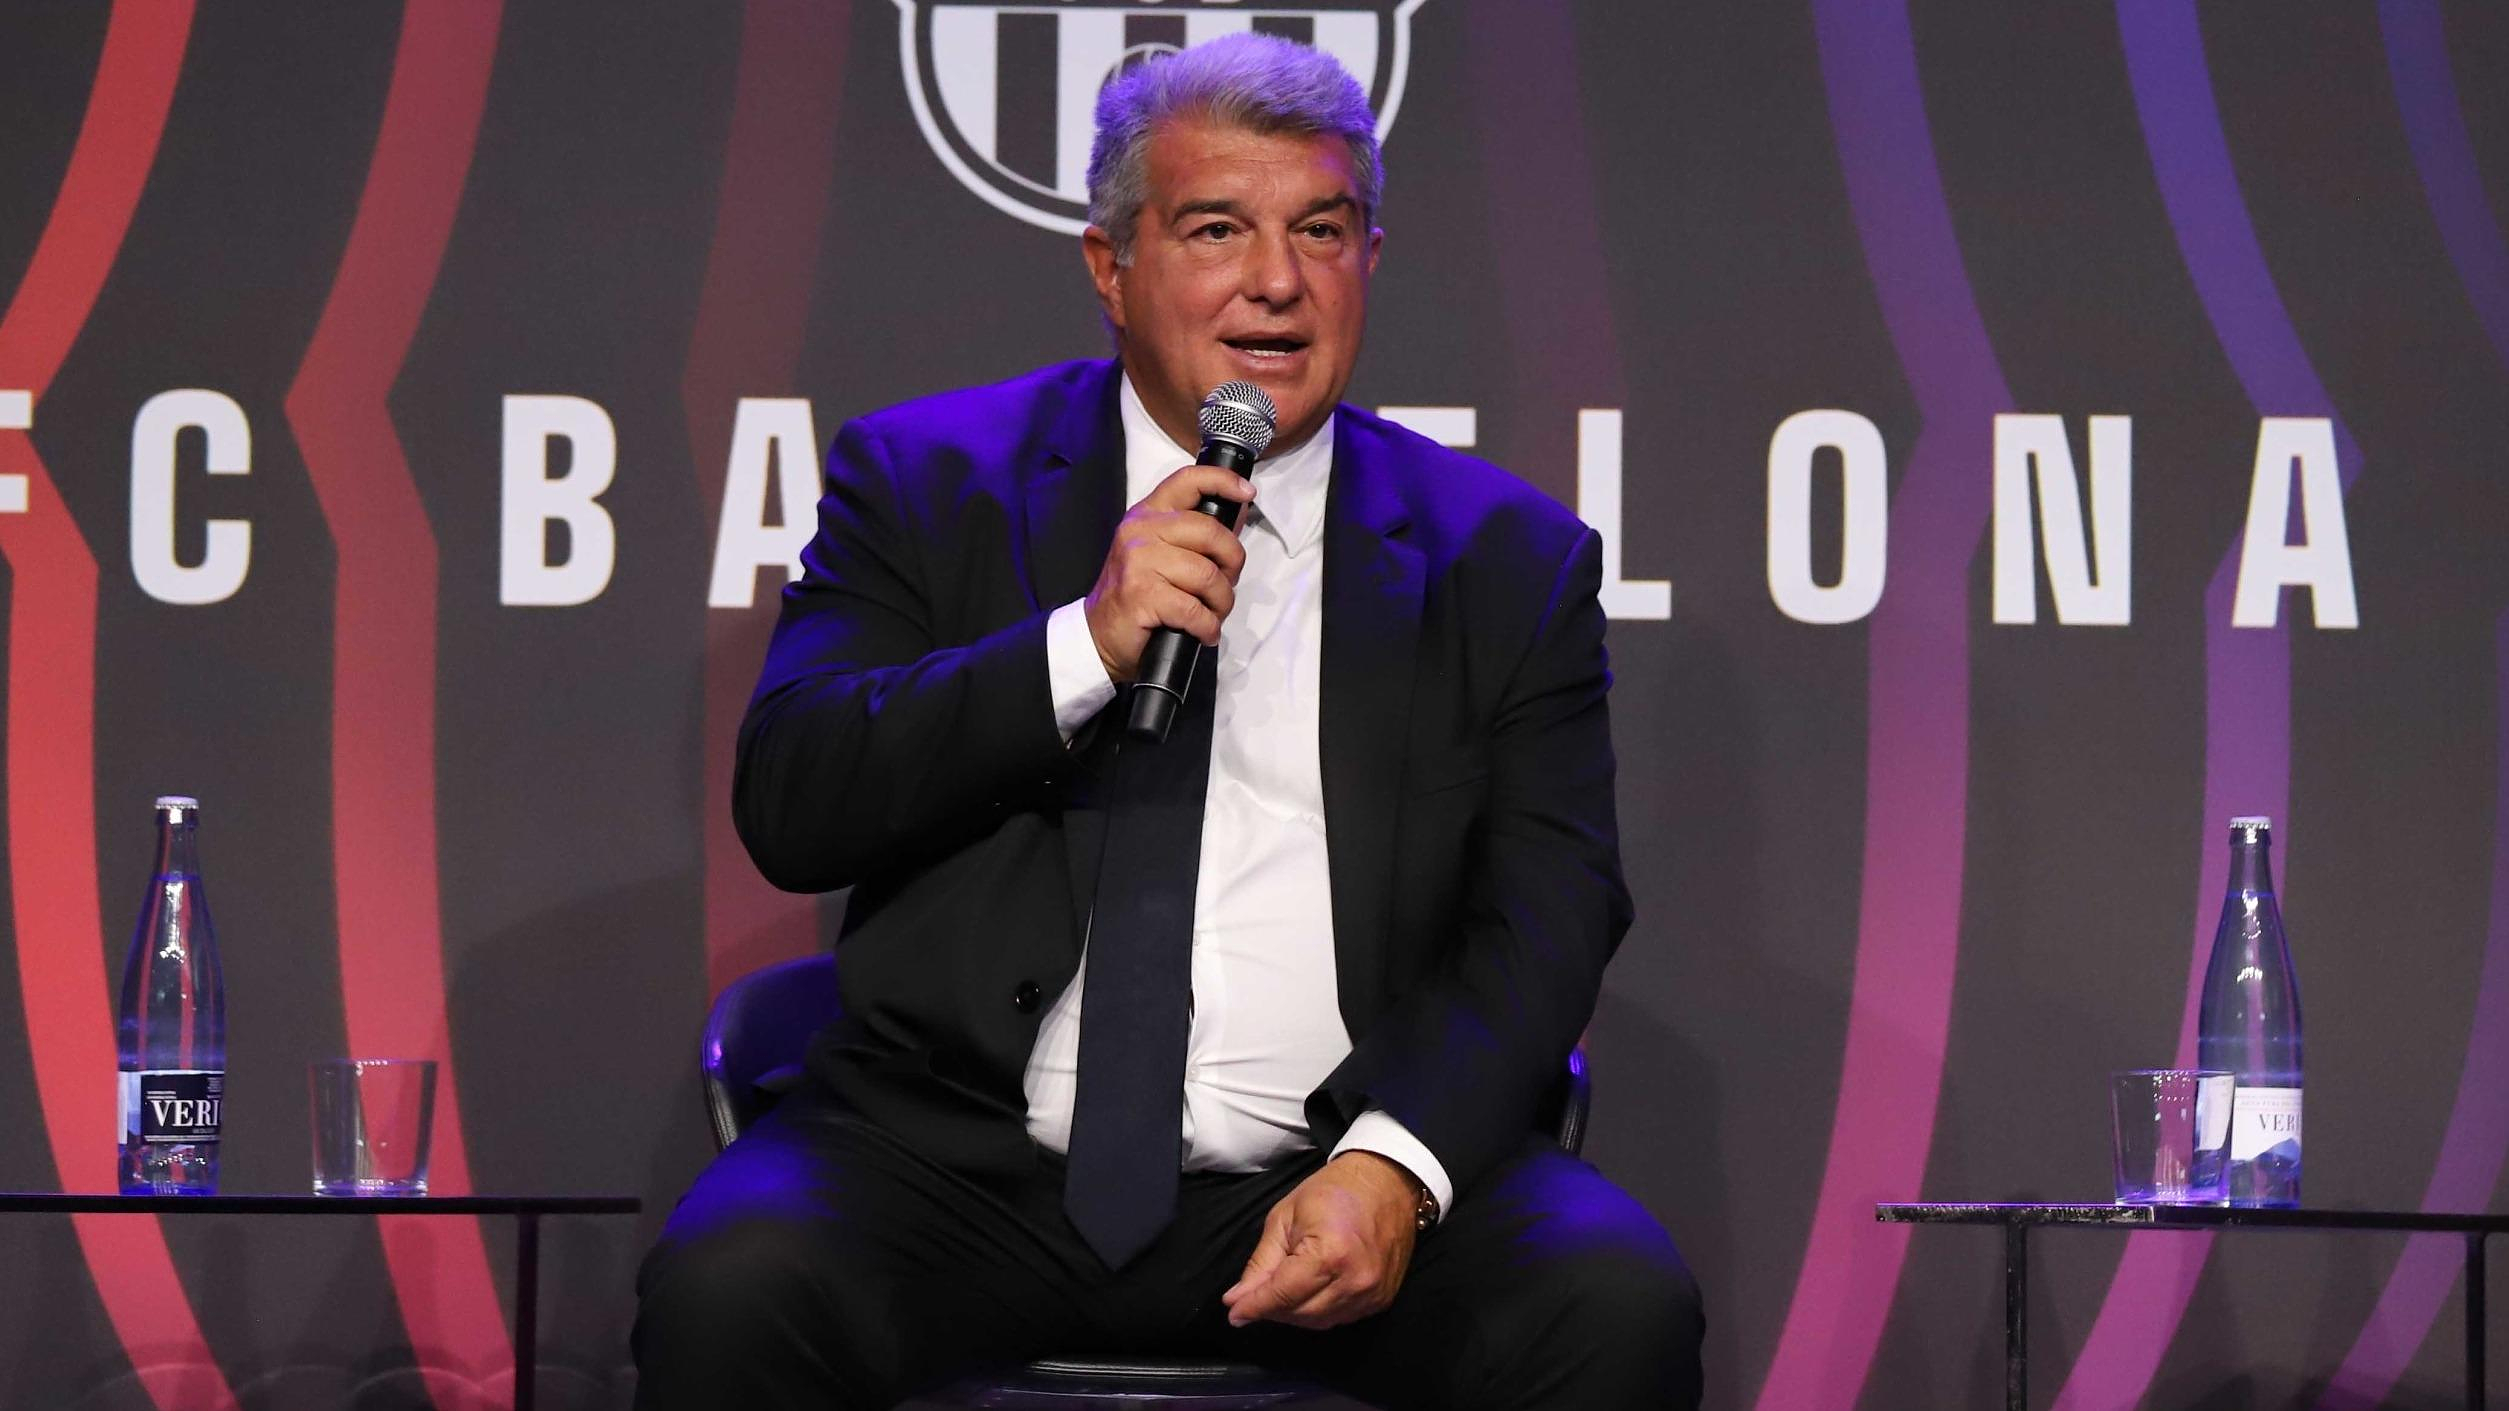 Liga: “It’s a shame,” criticizes Laporta after Real Madrid’s controversial victory